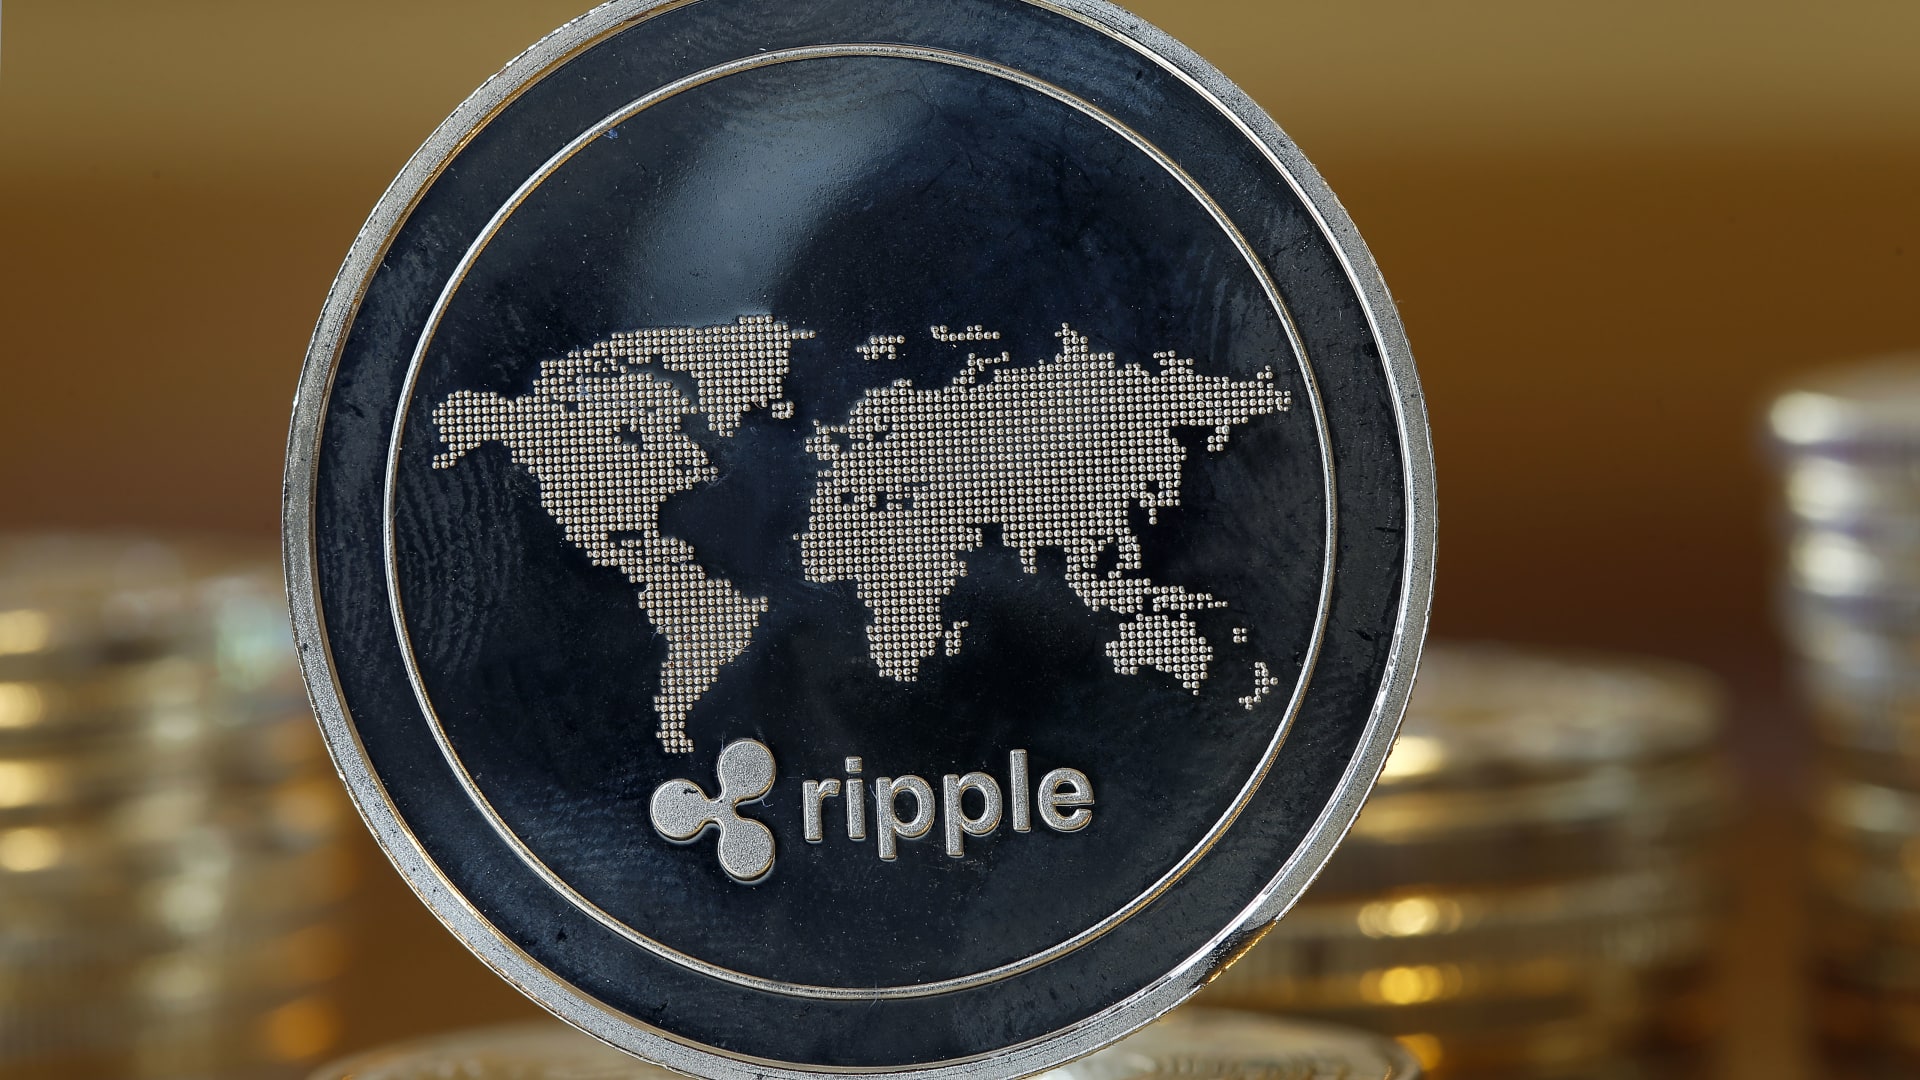 Ripple says U.S. banks will want to use XRP cryptocurrency after partial victory in SEC fight